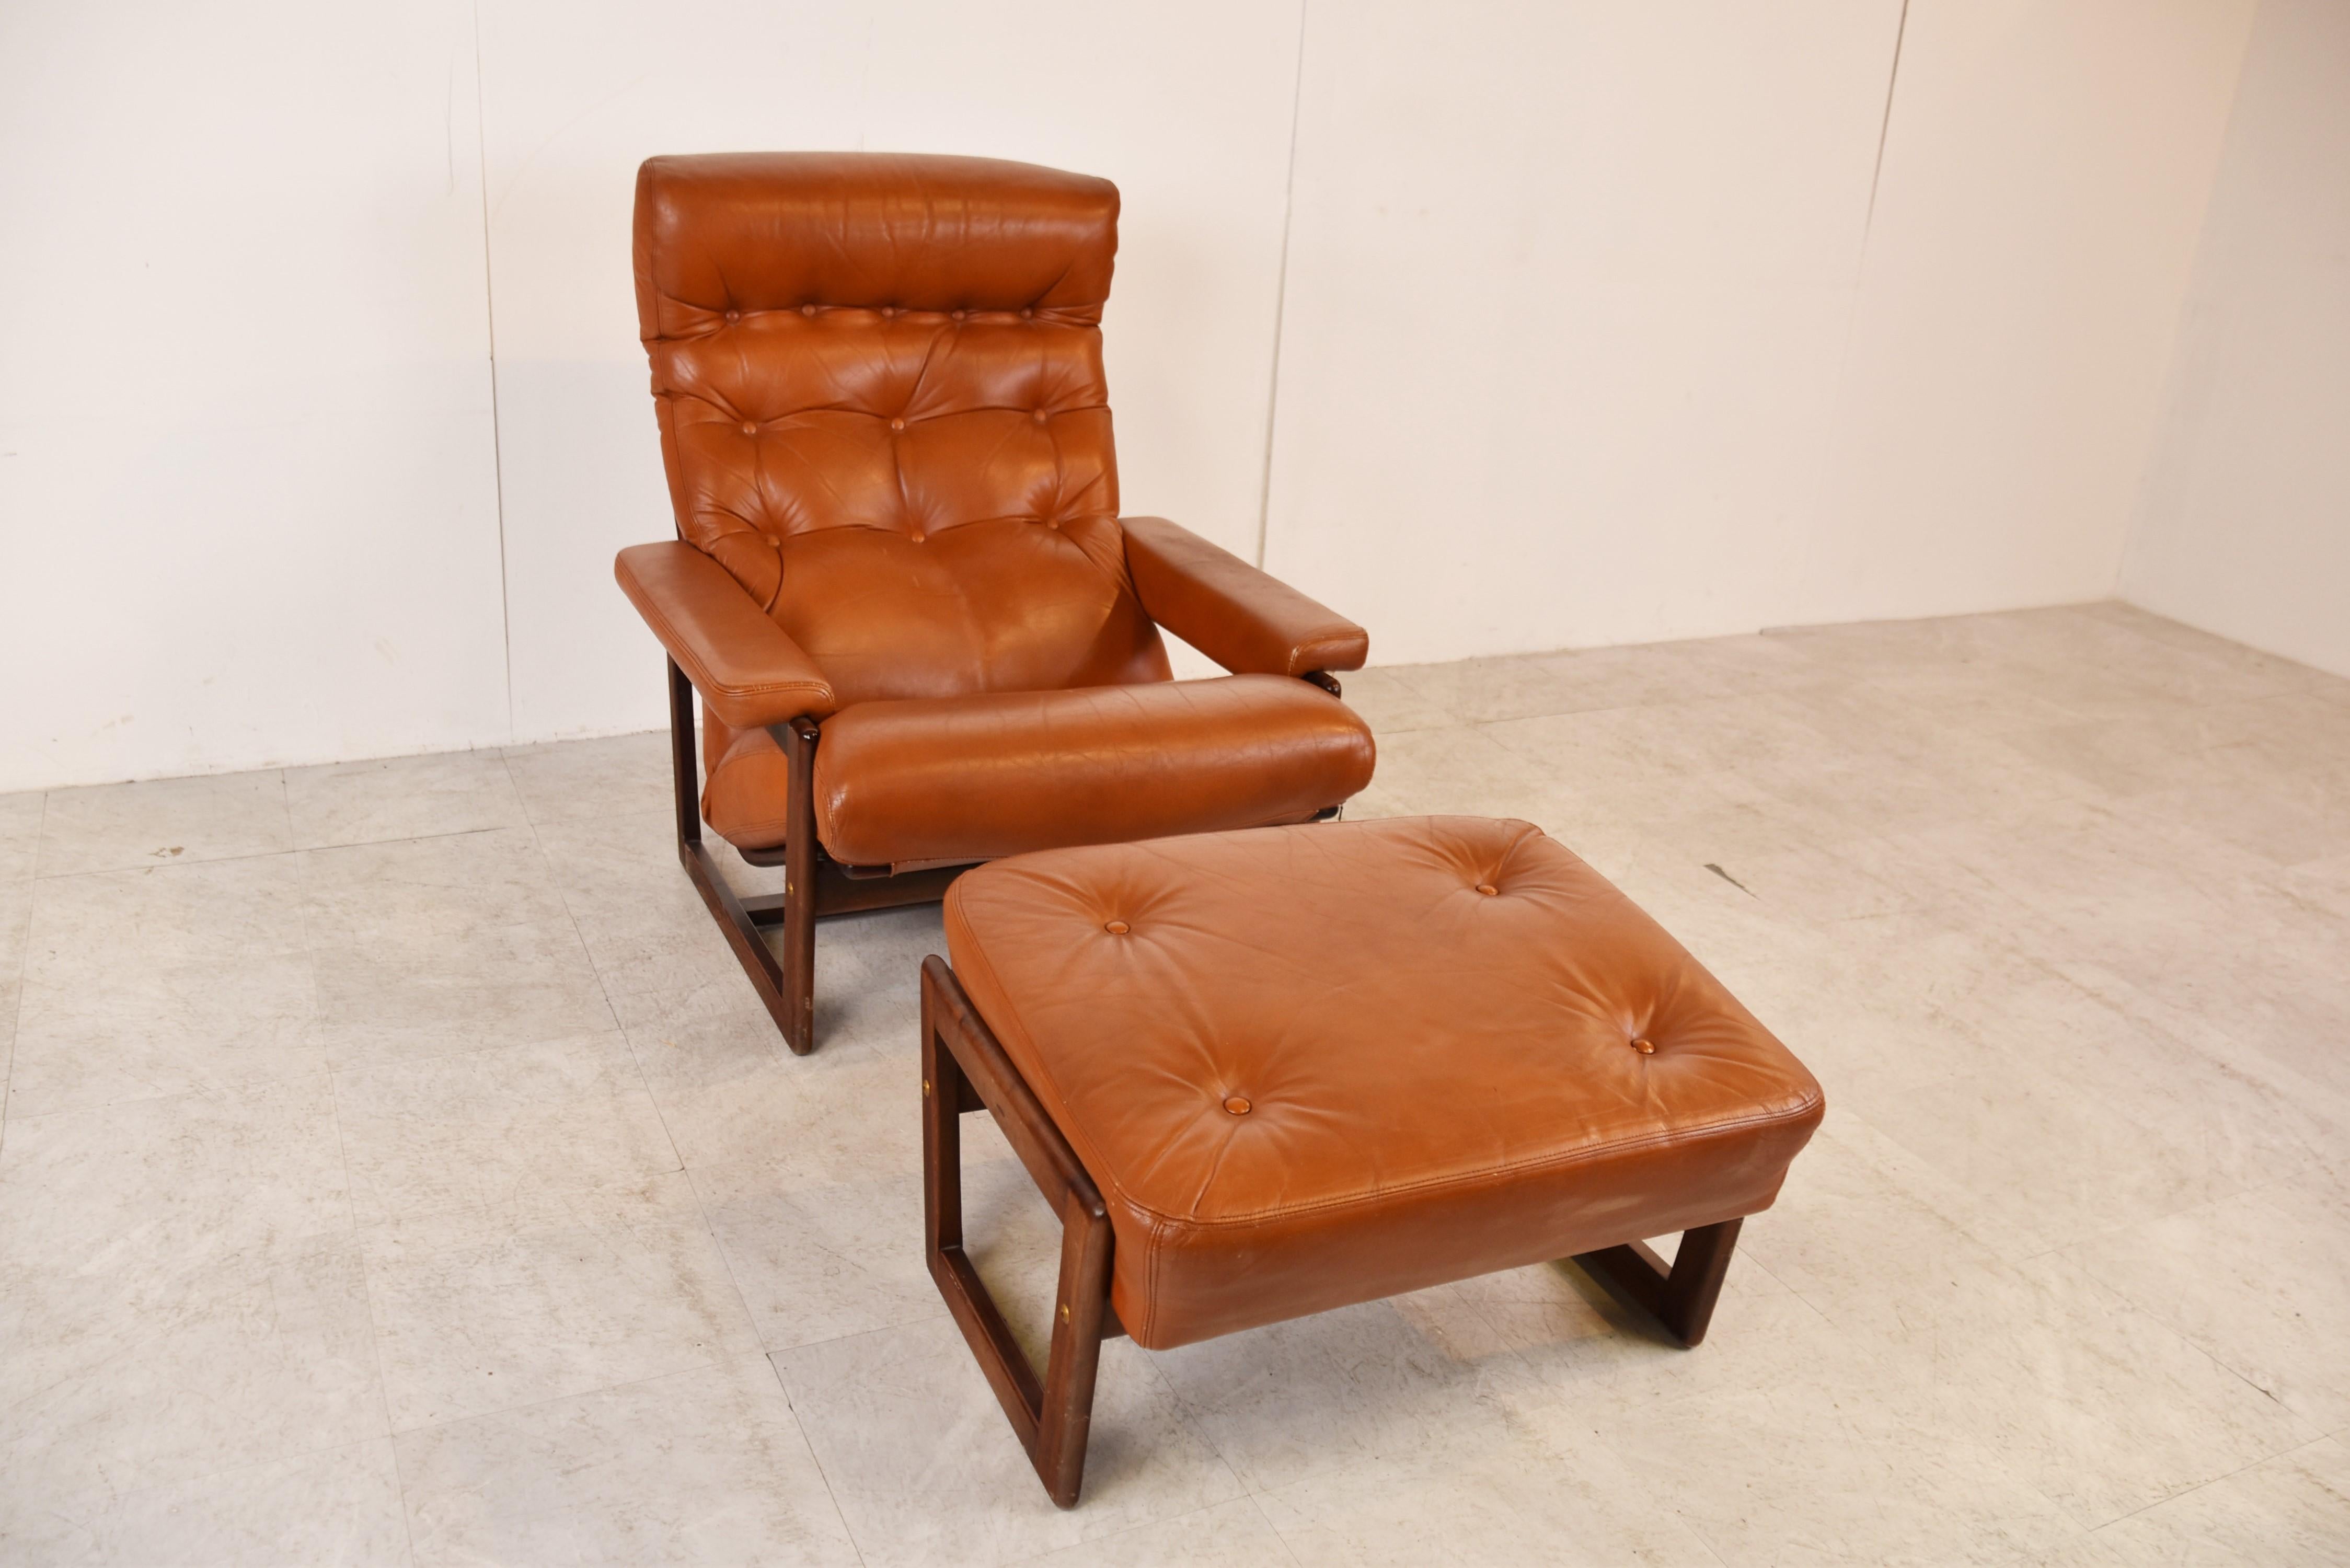 German Vintage Leather Armchair with Hocker, 1970s